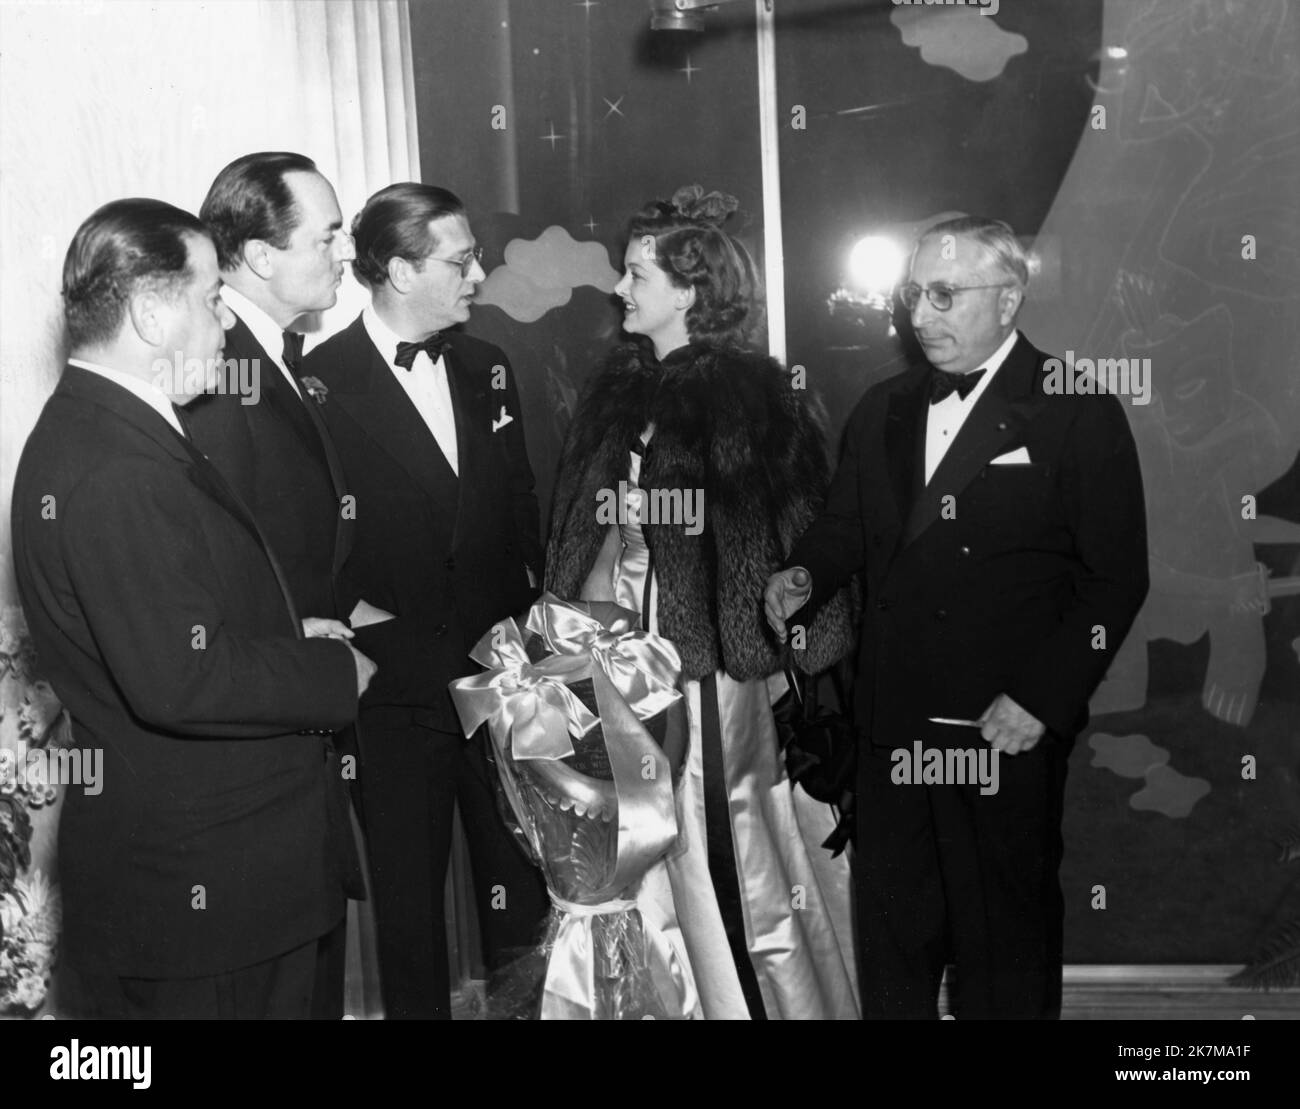 CHARLES P. SKOURAS WILLIAM POWELL HUNT STROMBERG MYRNA LOY and LOUIS B. MAYER at the Inglewood, Hollywood Premiere of ANOTHER THIN MAN 1939 director W.S. VAN DYKE based on an original story by Dashiell Hammett producer Hunt Stromberg Metro Goldwyn Mayer Stock Photo